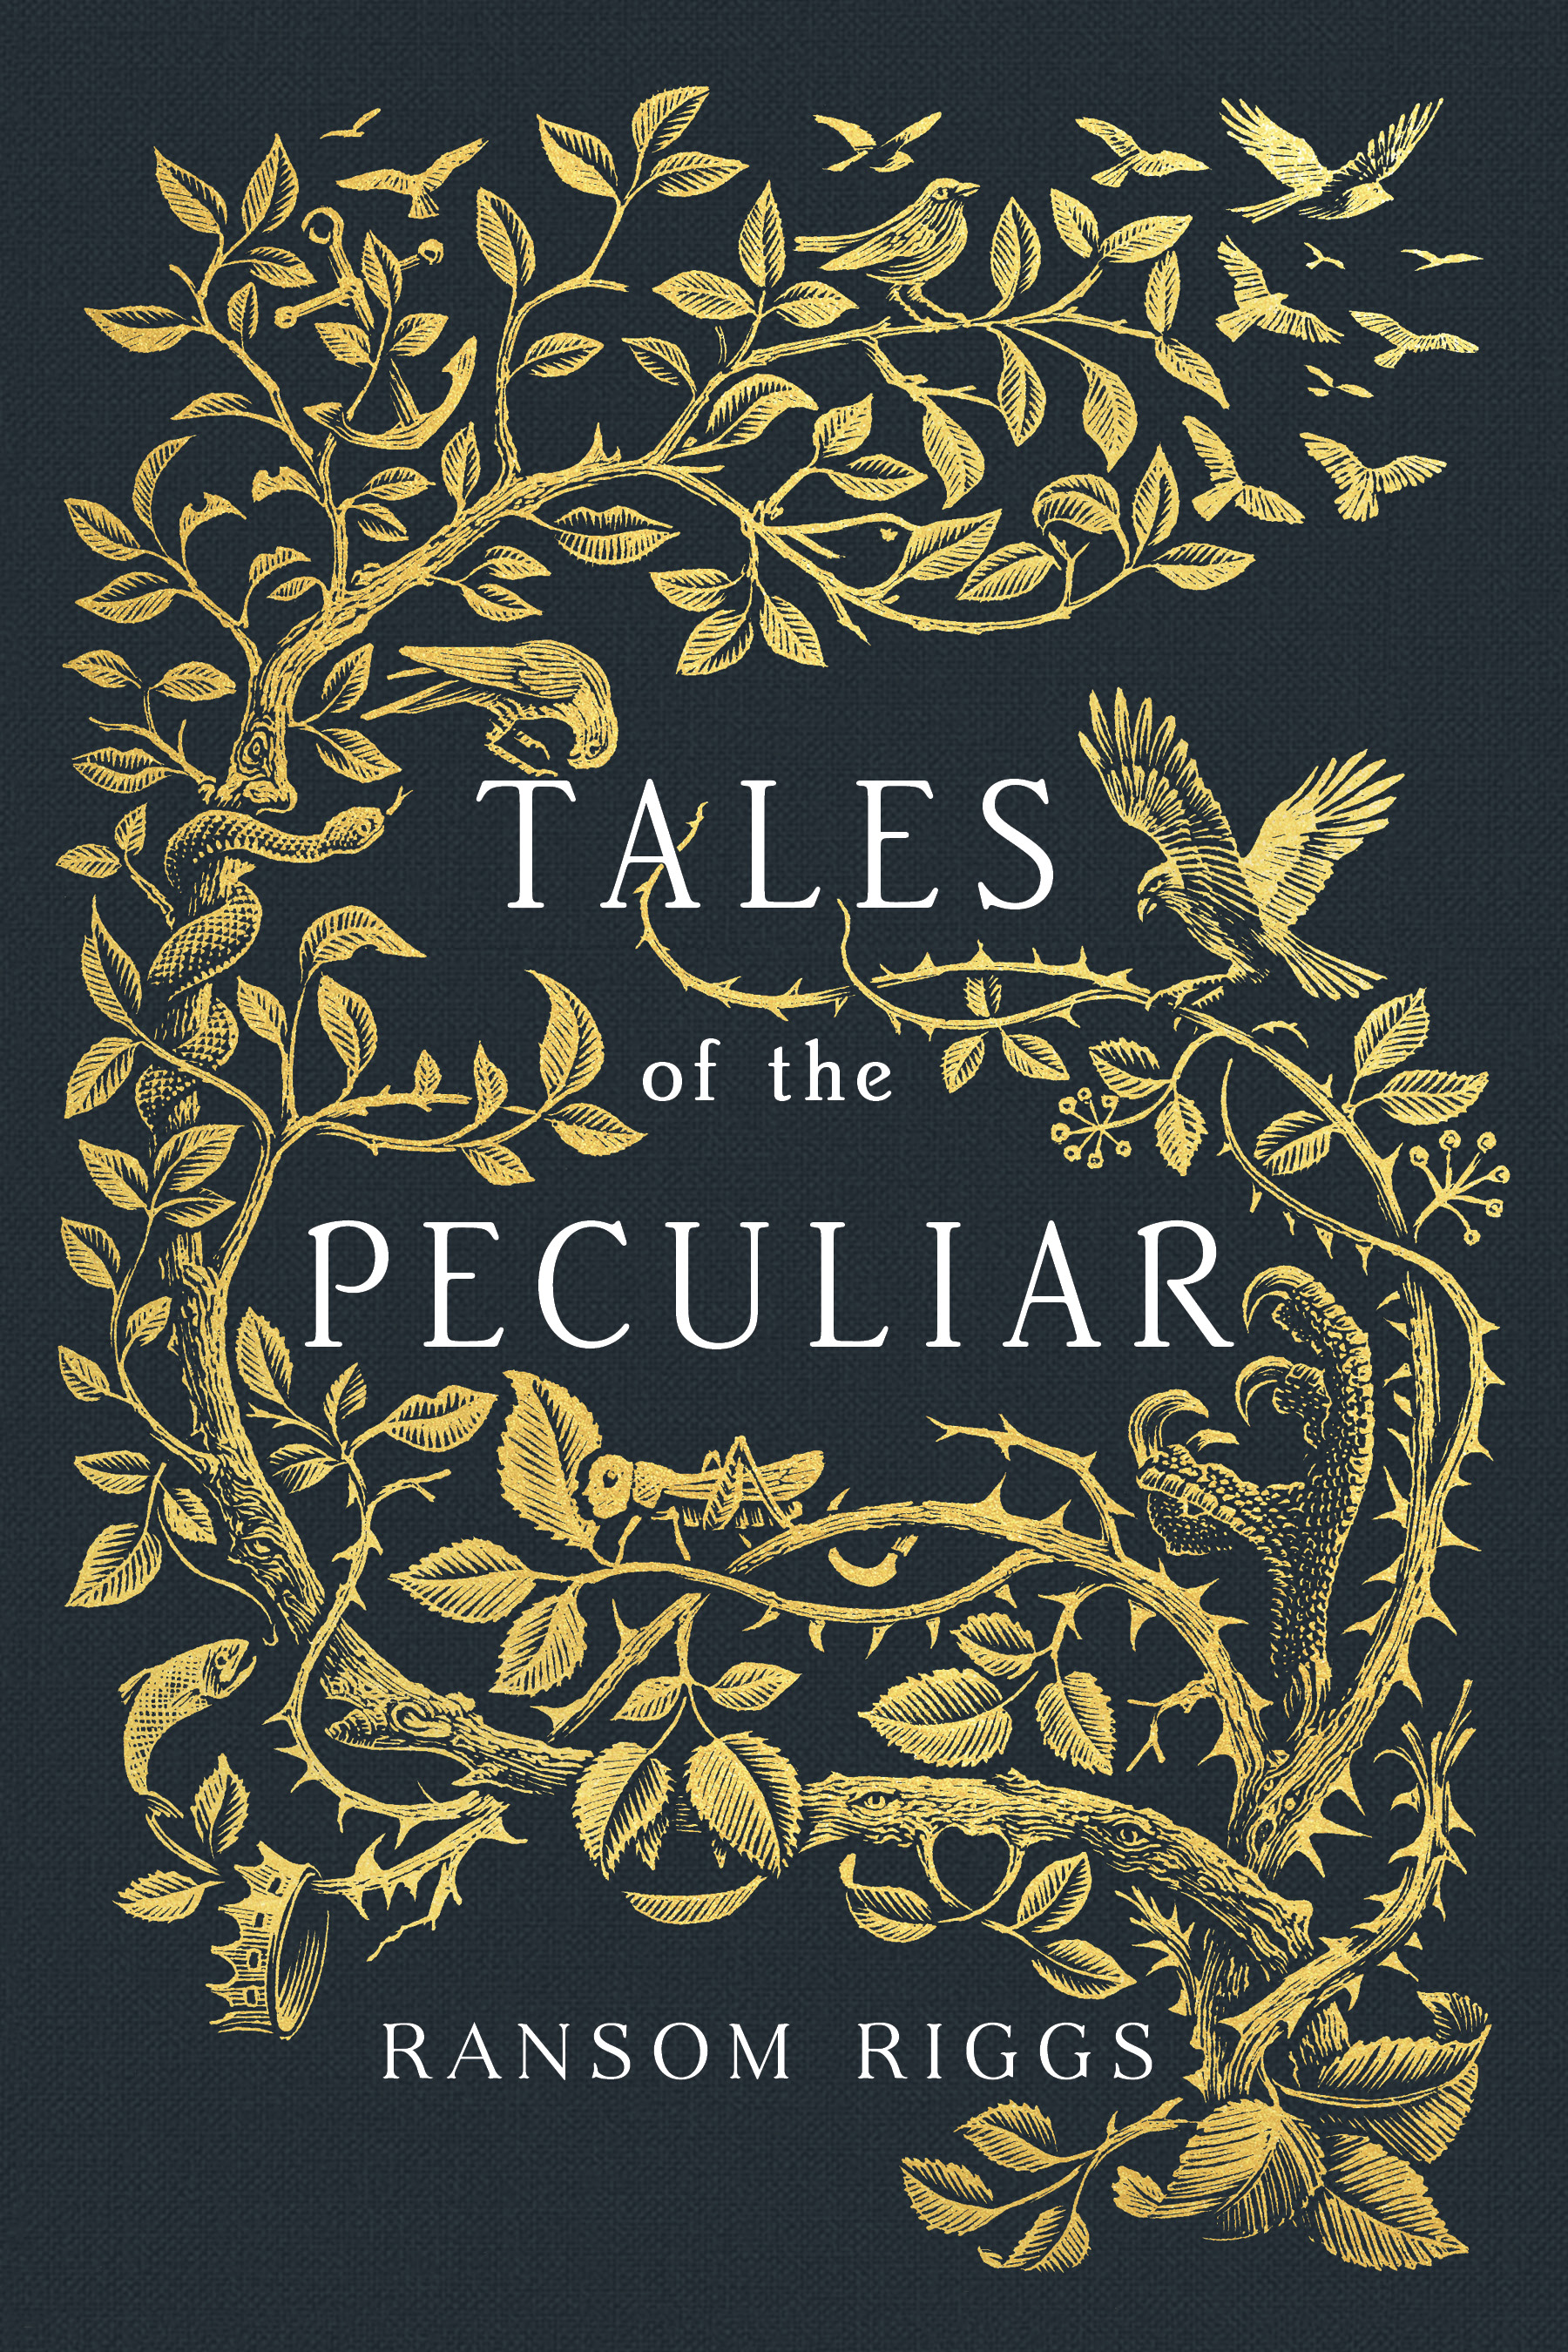 tales of the peculiar by ransom riggs